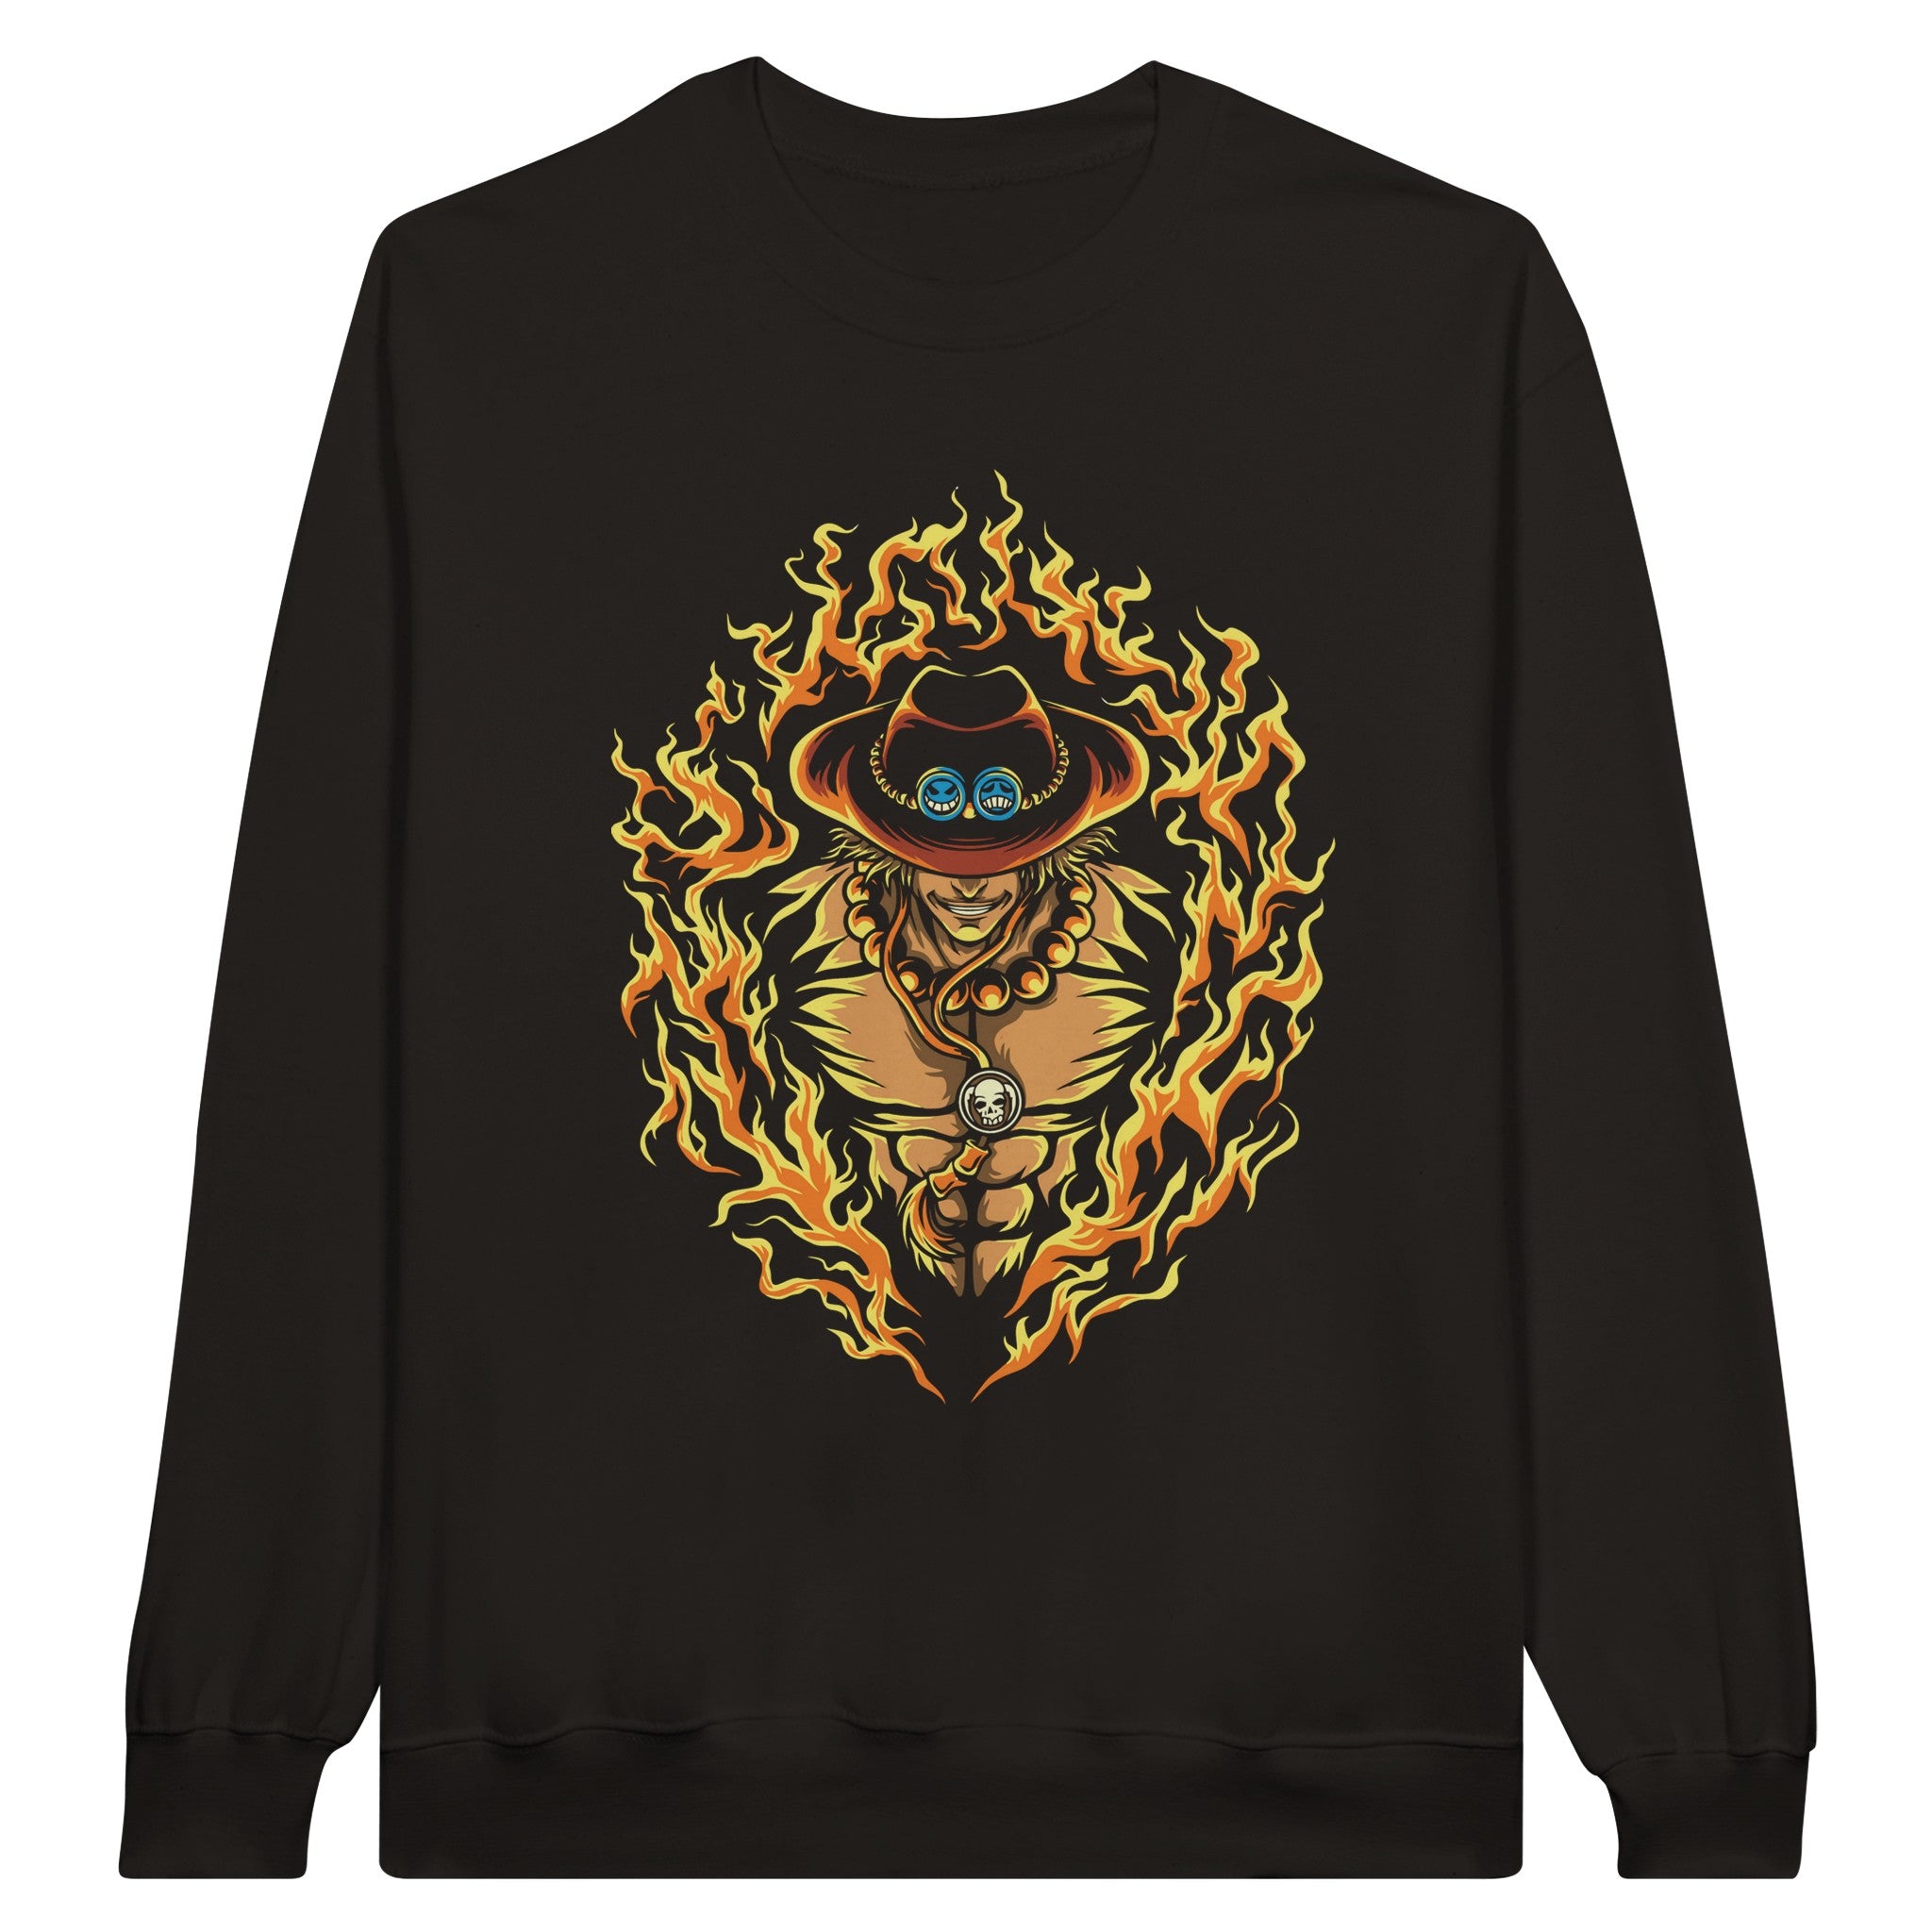 shop and buy one piece anime clothing portugas d ace sweatshirt/longsleeve/jumper